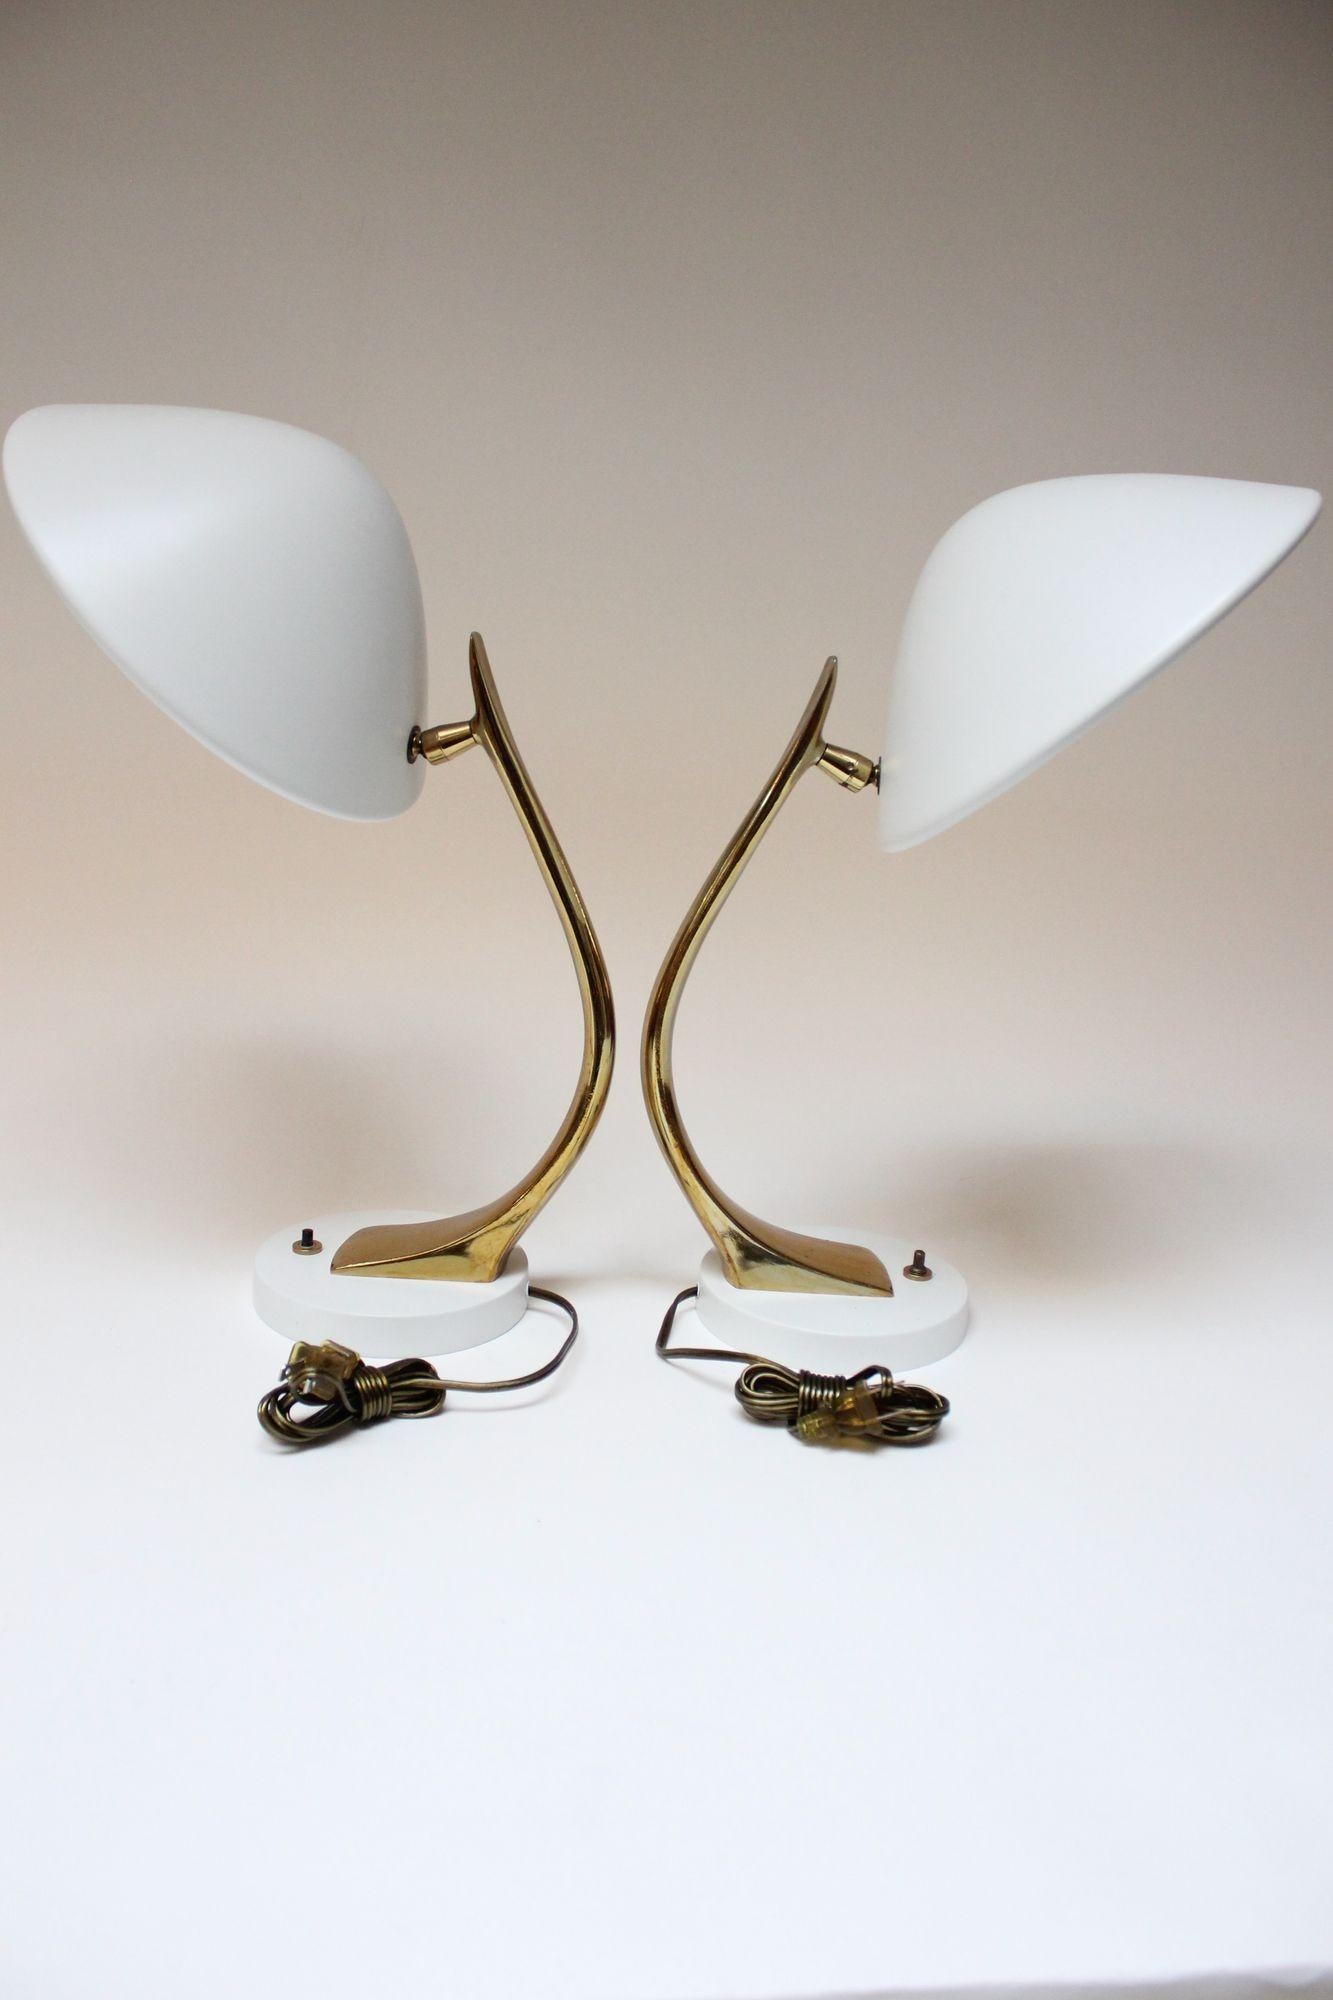 Mid-Century Modern Laurel Lamp Co. enameled-metal and brass-finish table lamps (ca. 1960s, USA). Curved brass-finish metal stem houses domed matte-white metal shade, all supported by circular metal base. Full 360 degree swiveling mobility with tilt